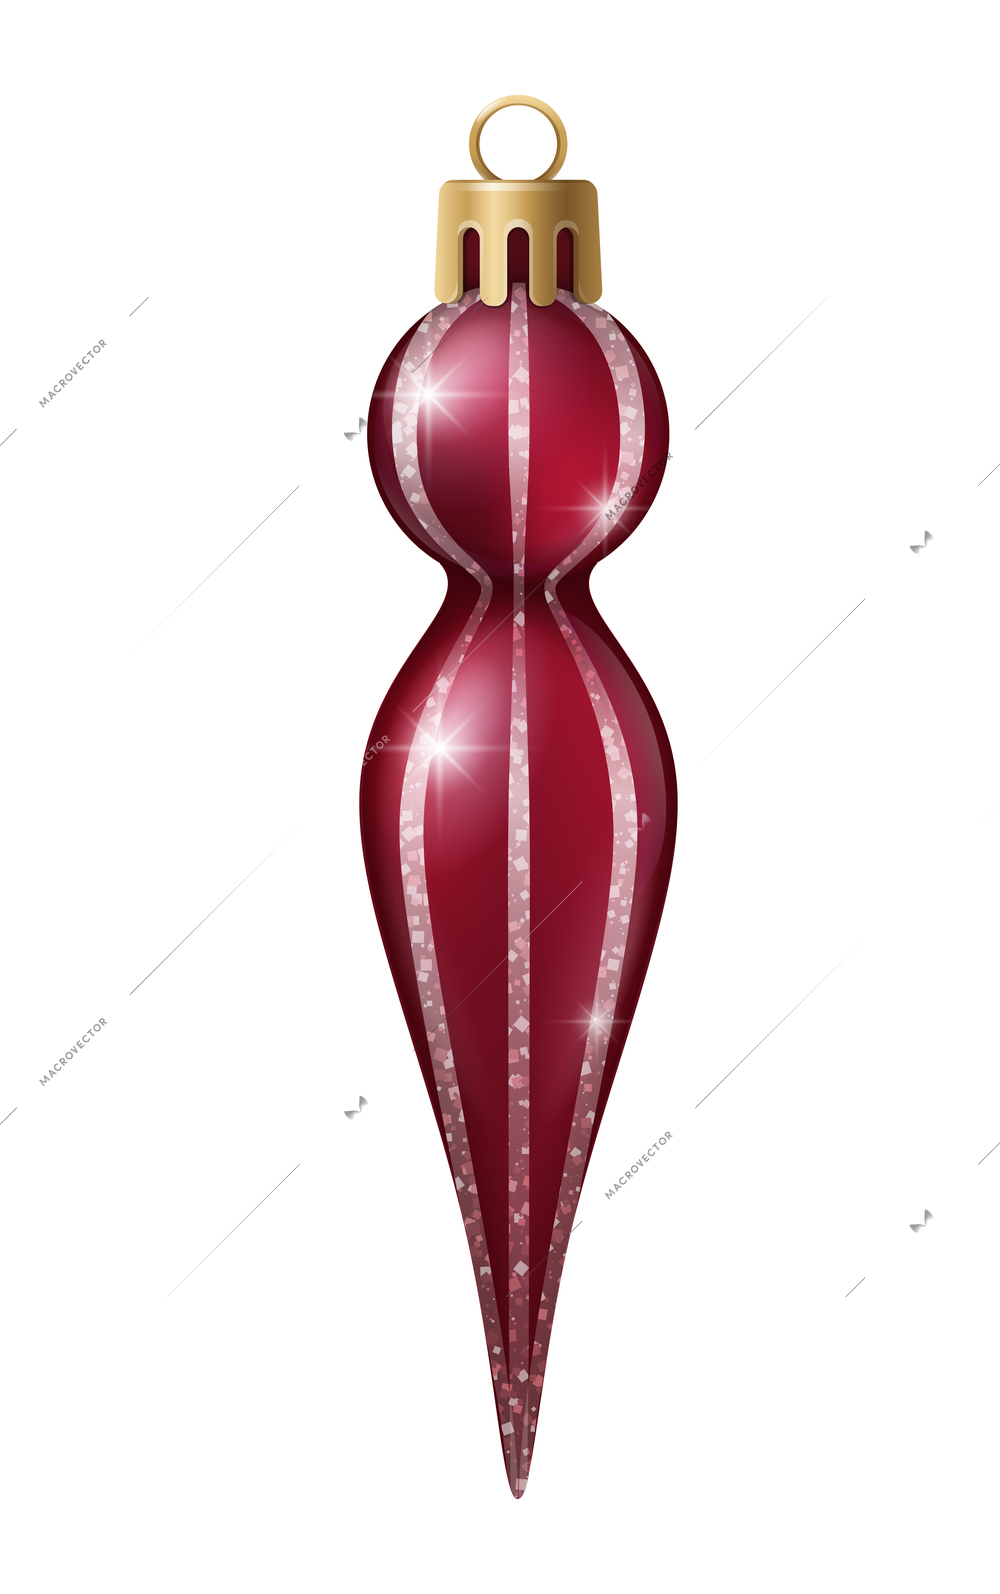 Realistic christmas tree toy composition with ball icicle shaped christmas ornament with stripes vector illustration